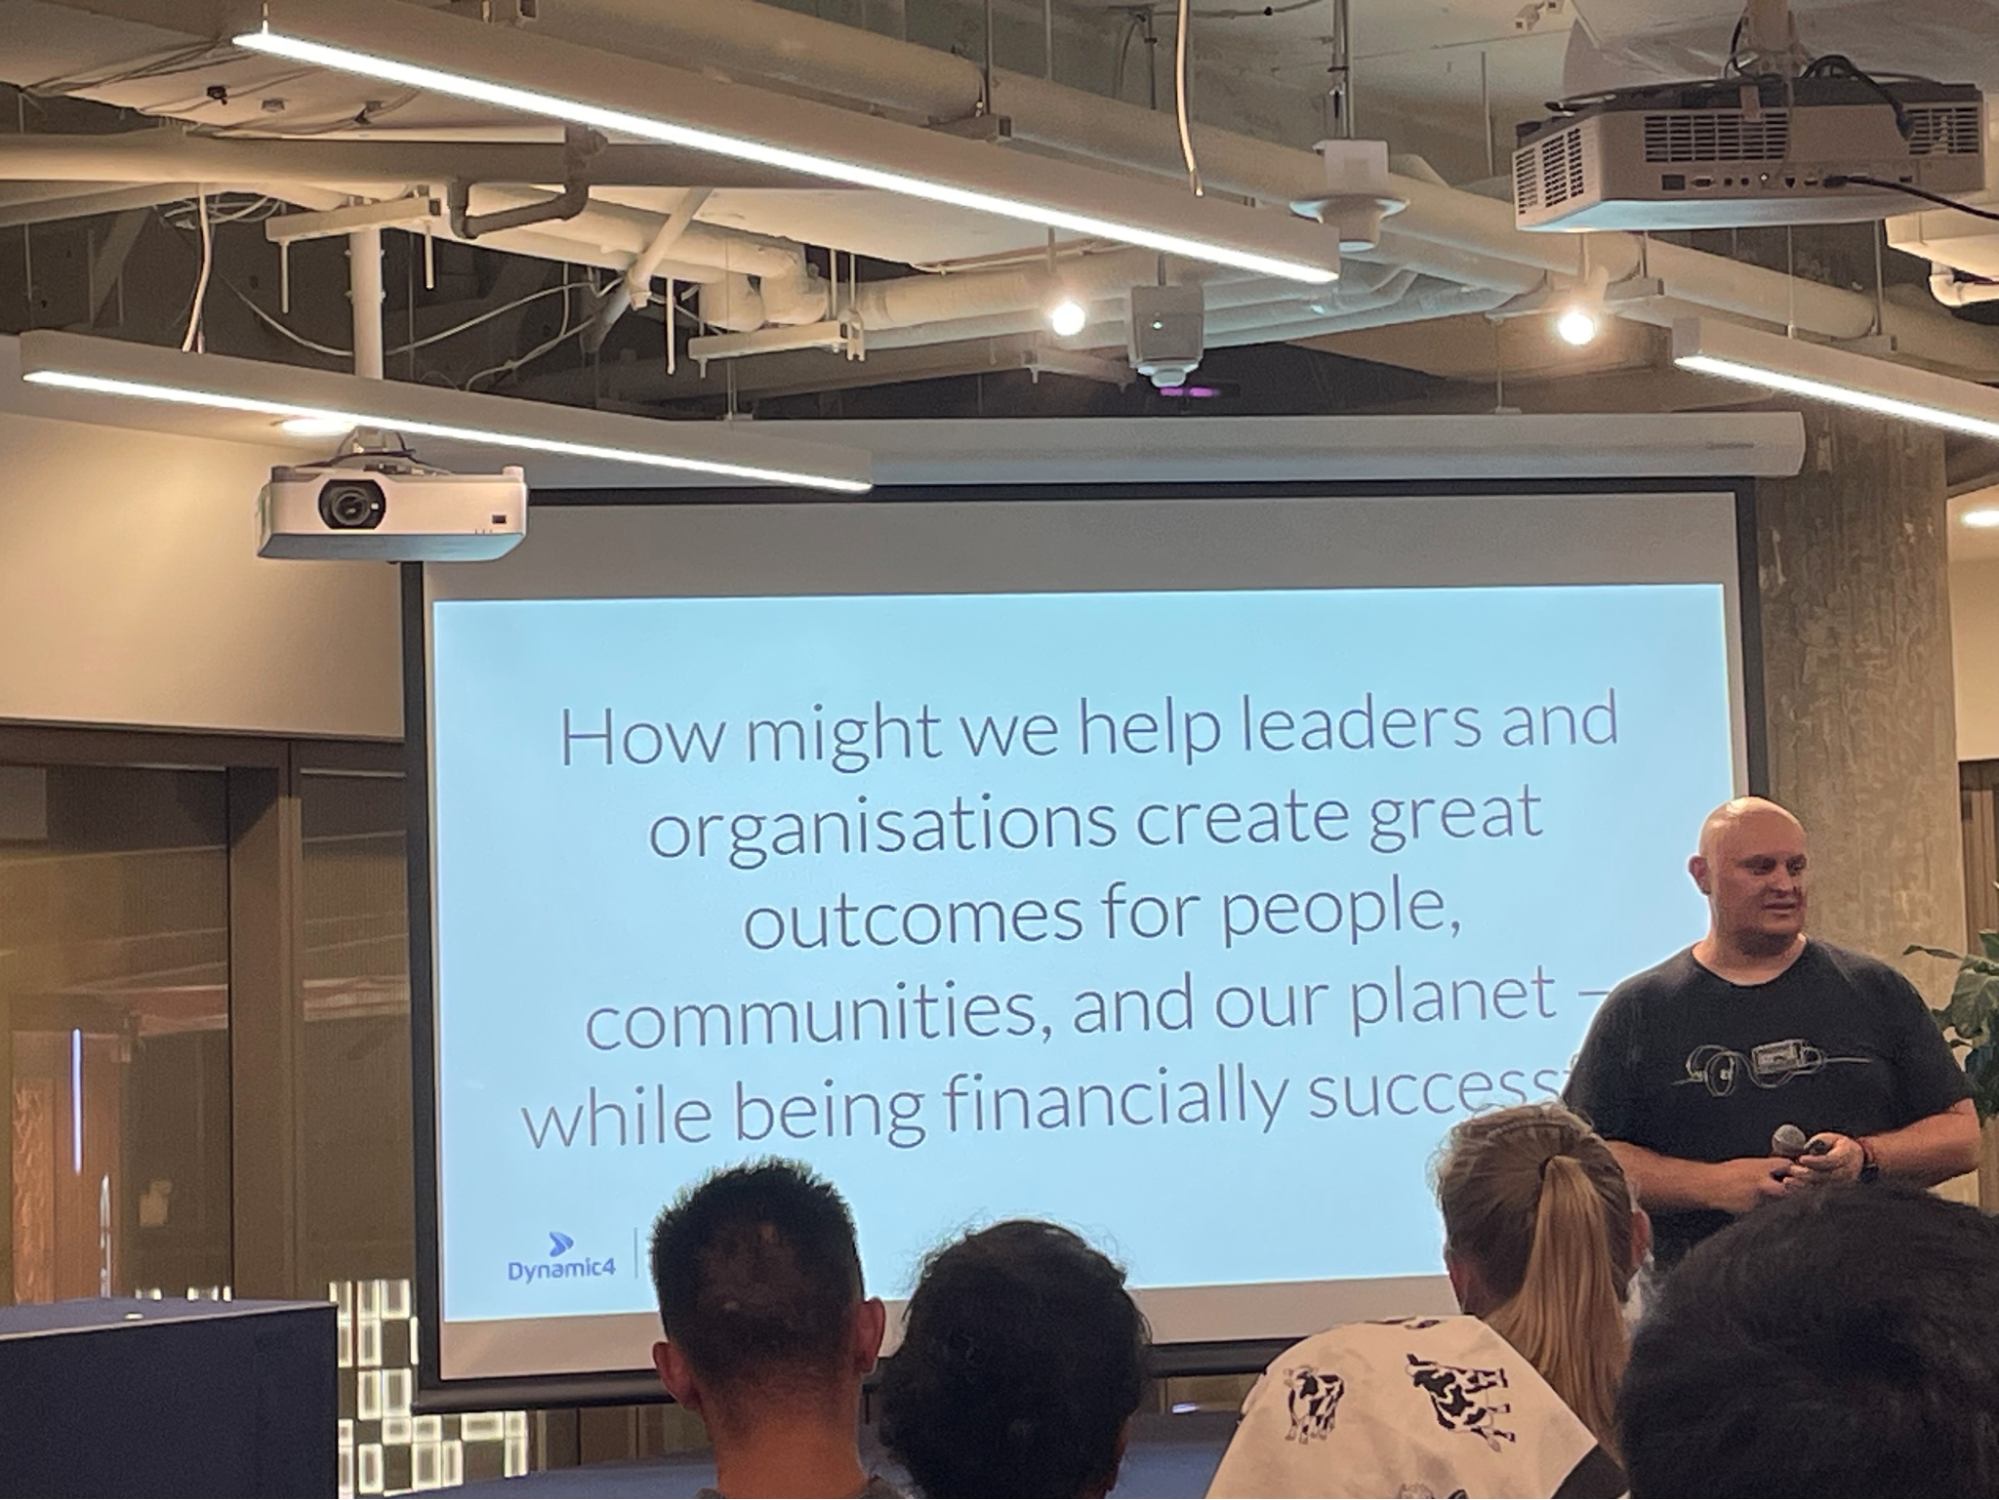 A photo from an event showing a slide about how might we help leaders and organisations create great outcomes for people.